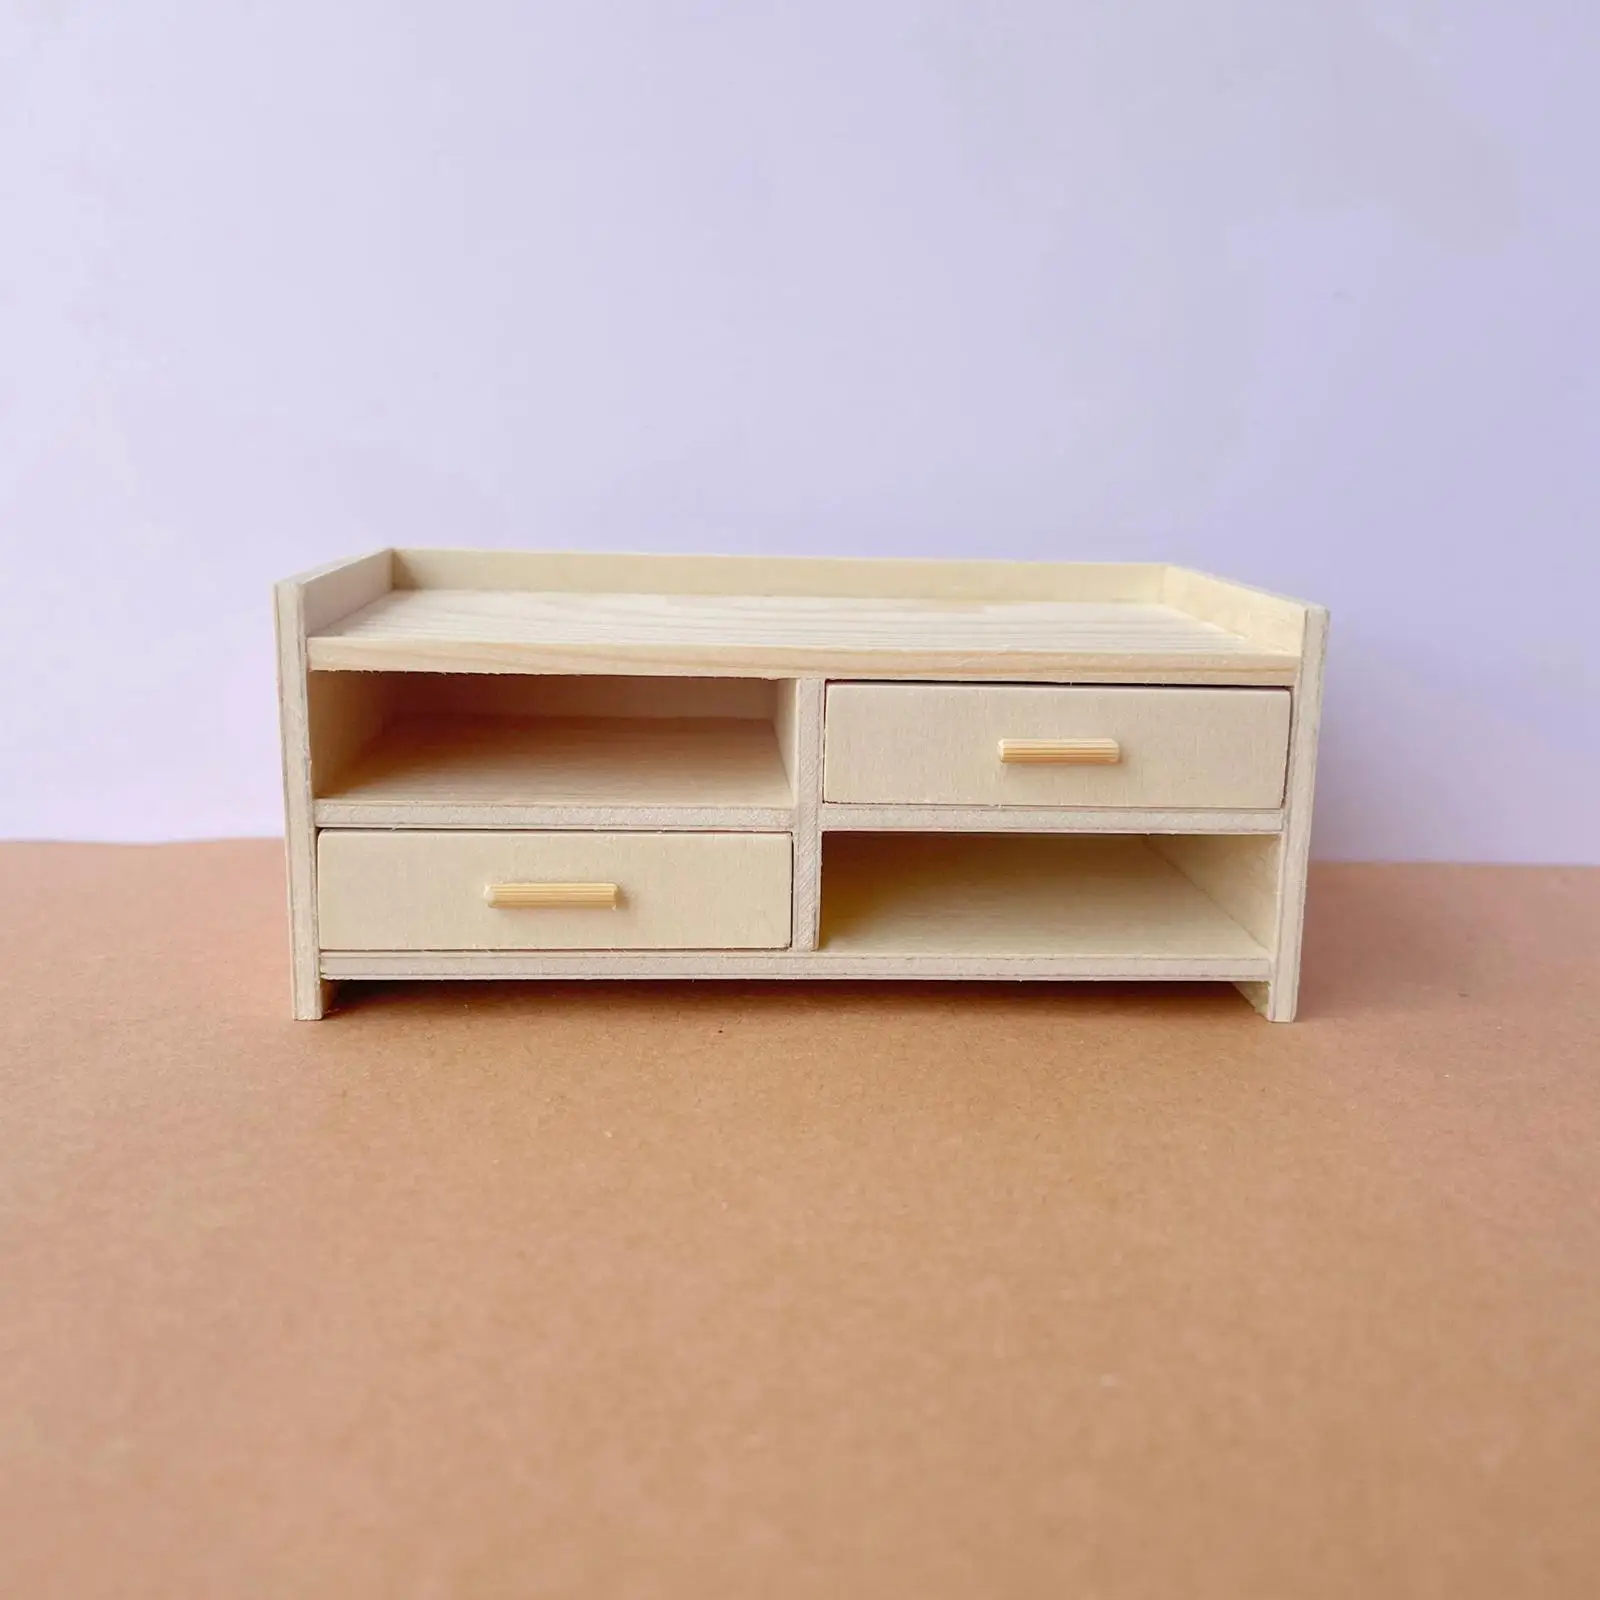 1:12 Miniature Wooden Cabinet with Drawer Accessories Toys Furniture Living Room Home Bedroom Simulation Life Scene Decor